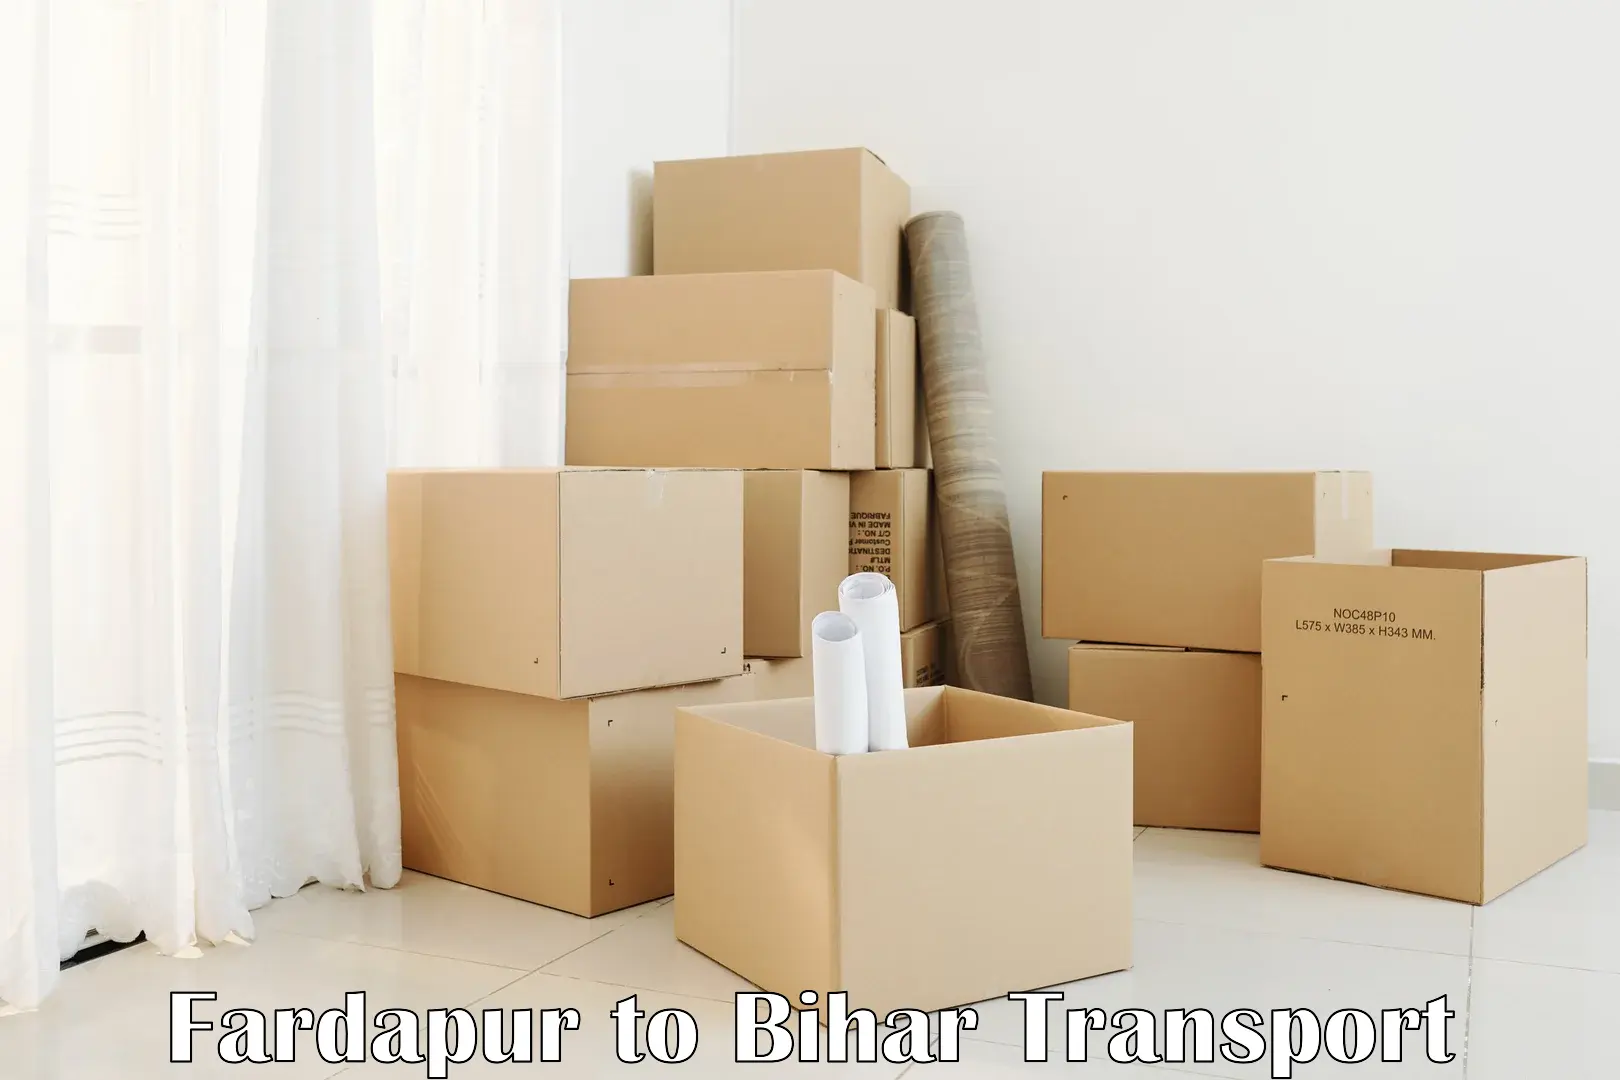 Best transport services in India Fardapur to Bhojpur